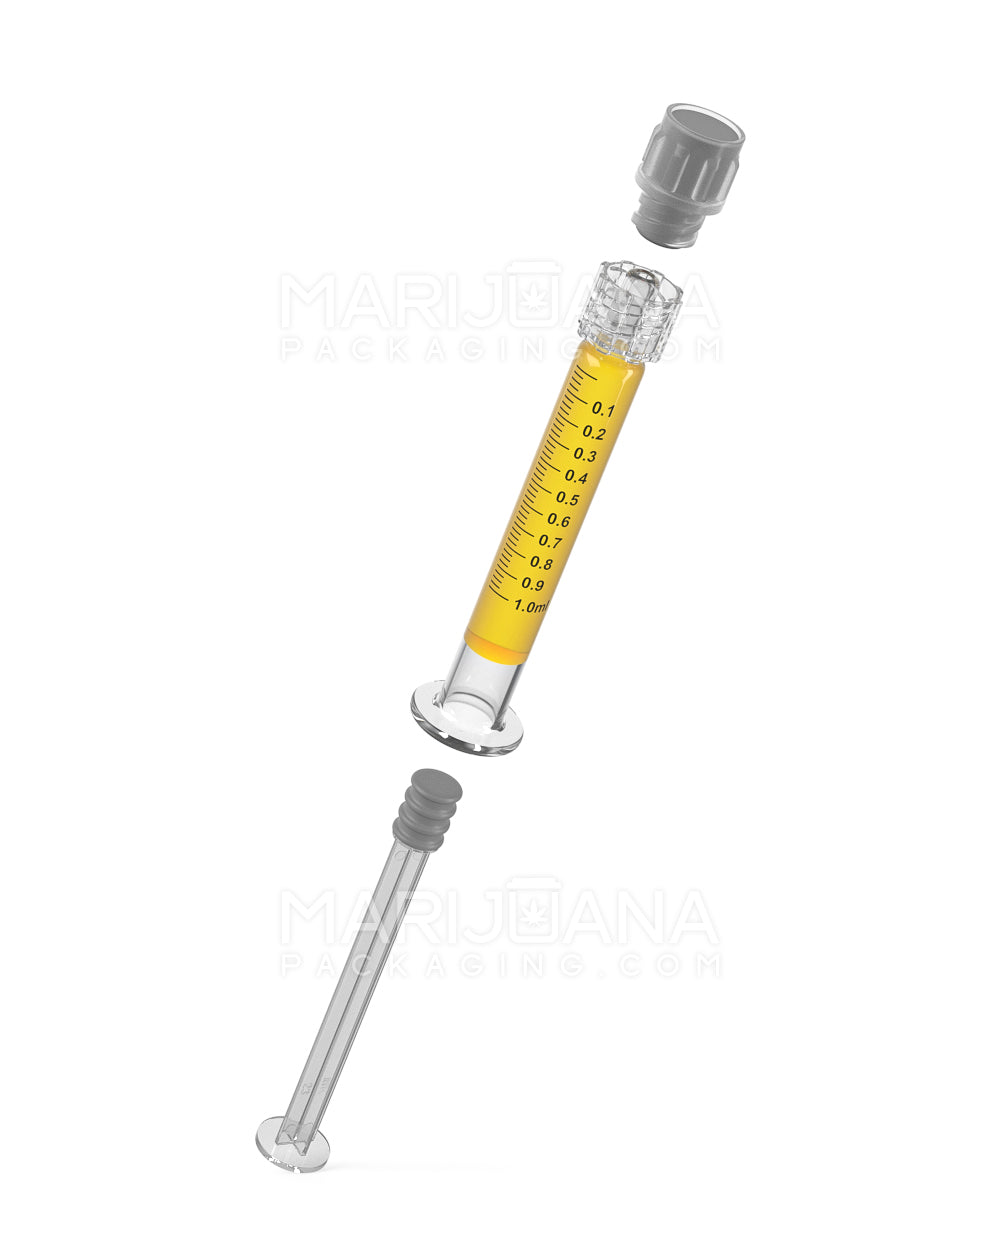 Luer Lock | Long Glass Dab Applicator Syringes | 1mL - 0.1mL Increments - 100 Count - 7